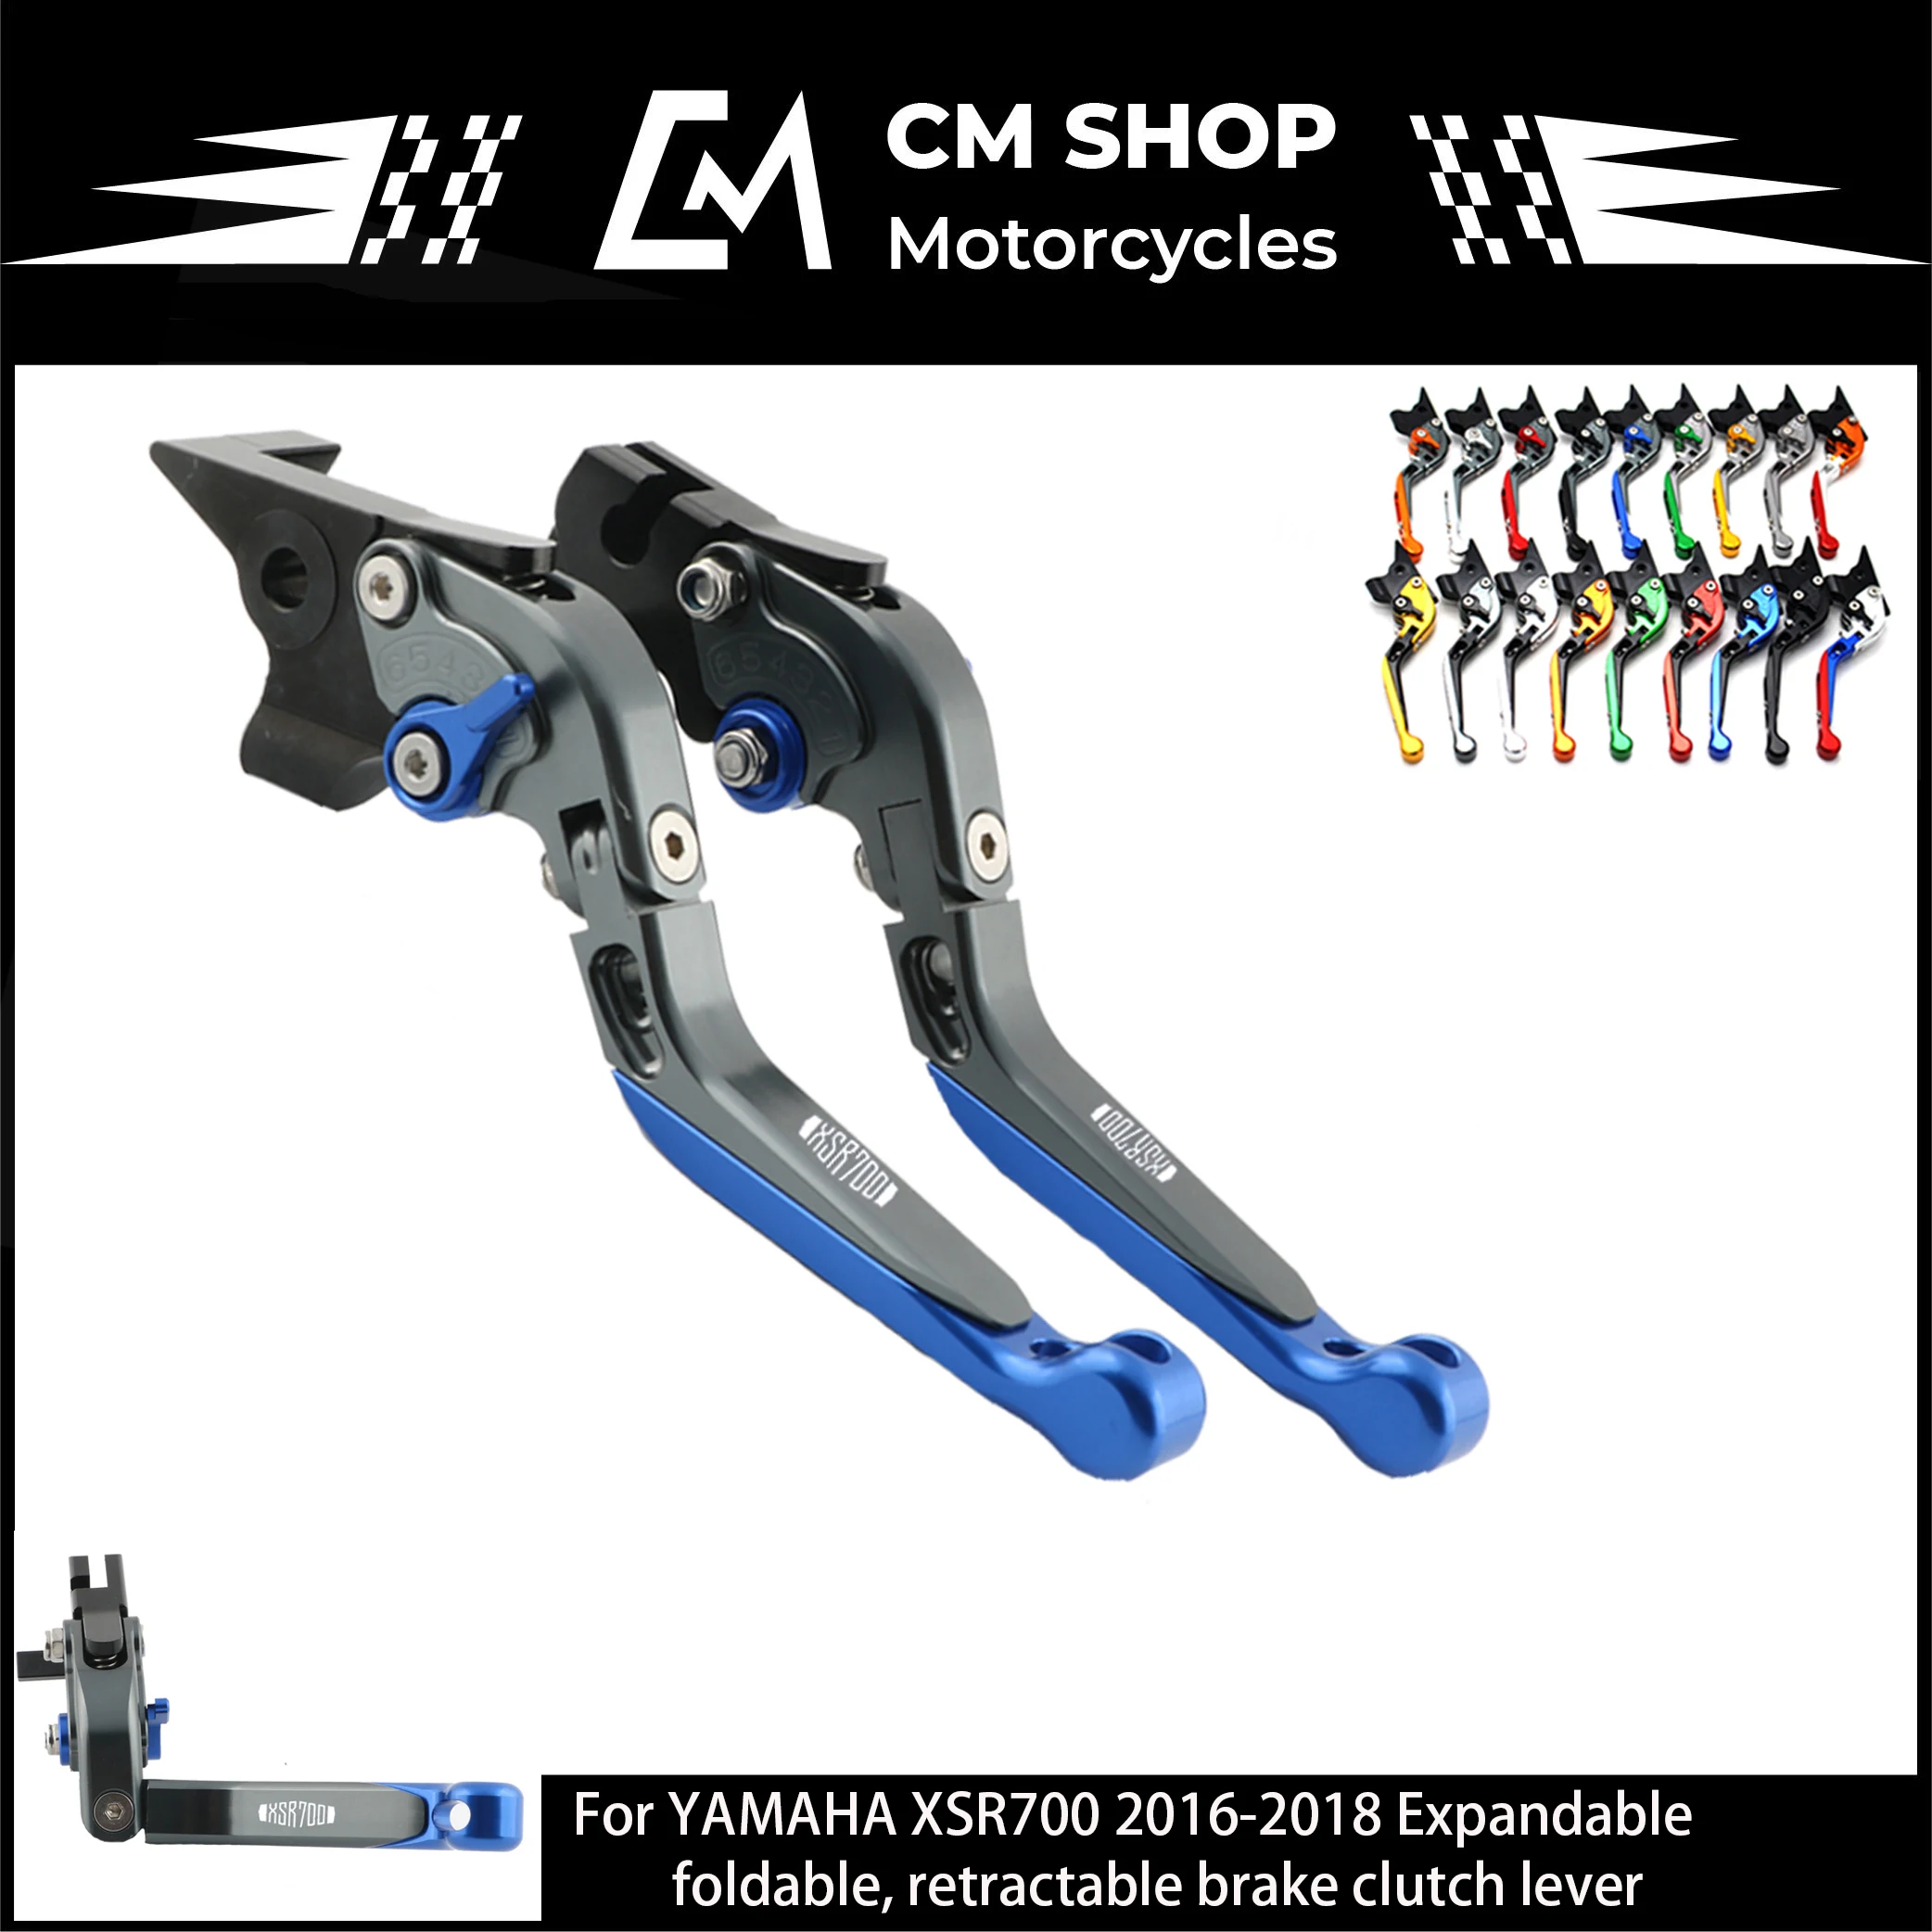 

For YAMAHA XSR 700 ABS XSR700 2016 2017 2018 Motorcycle Accessories Folding Extendable Brake Clutch Levers